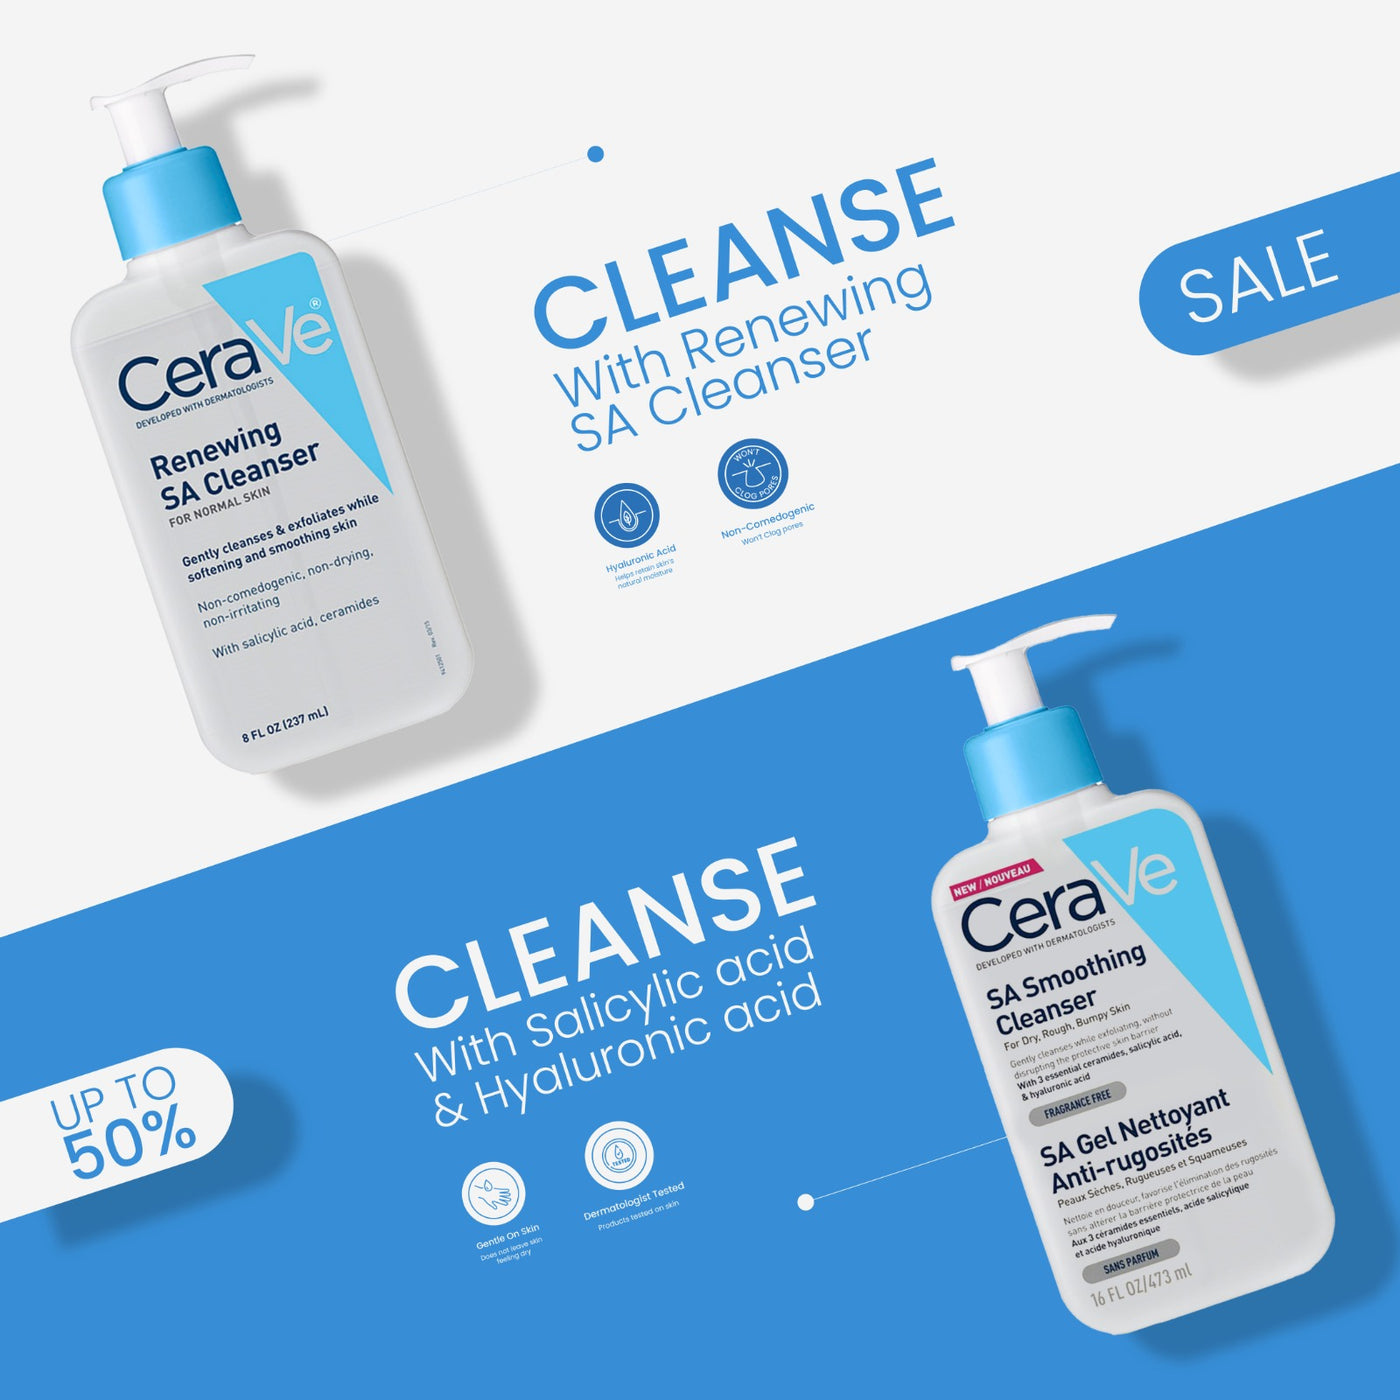 Grab! CeraVe Renewing SA Cleanser & SA Smoothing Cleanser